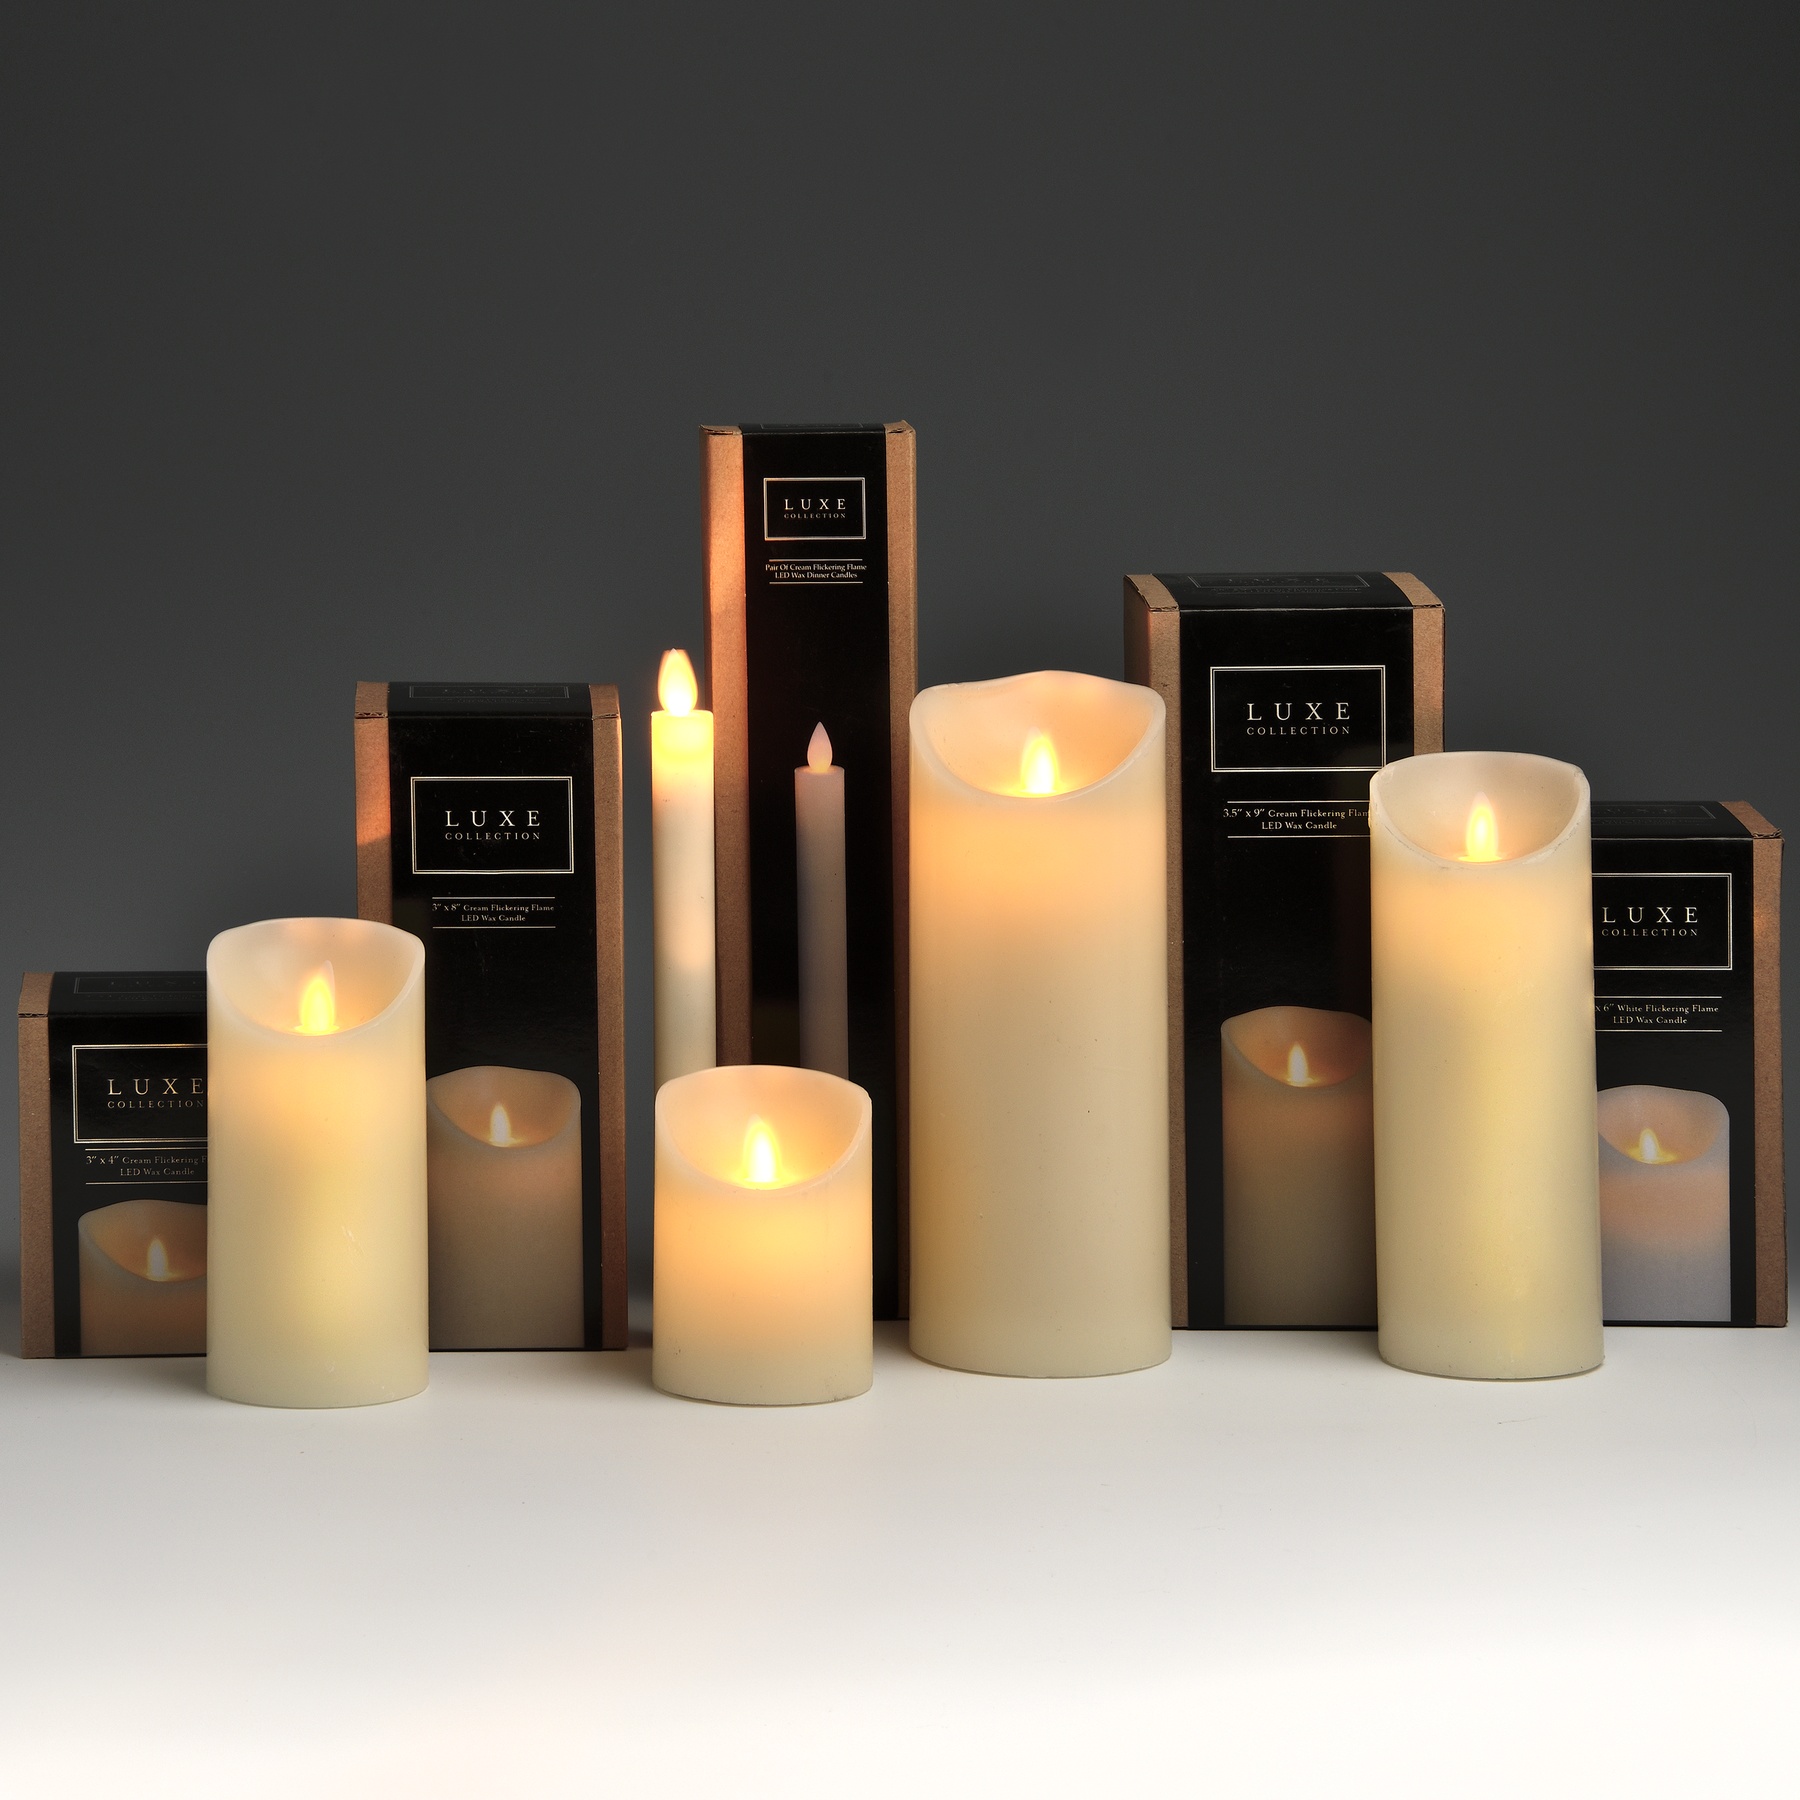 Luxe Collection 3.5 x9 Cream Flickering Flame LED Wax Candle - Image 4